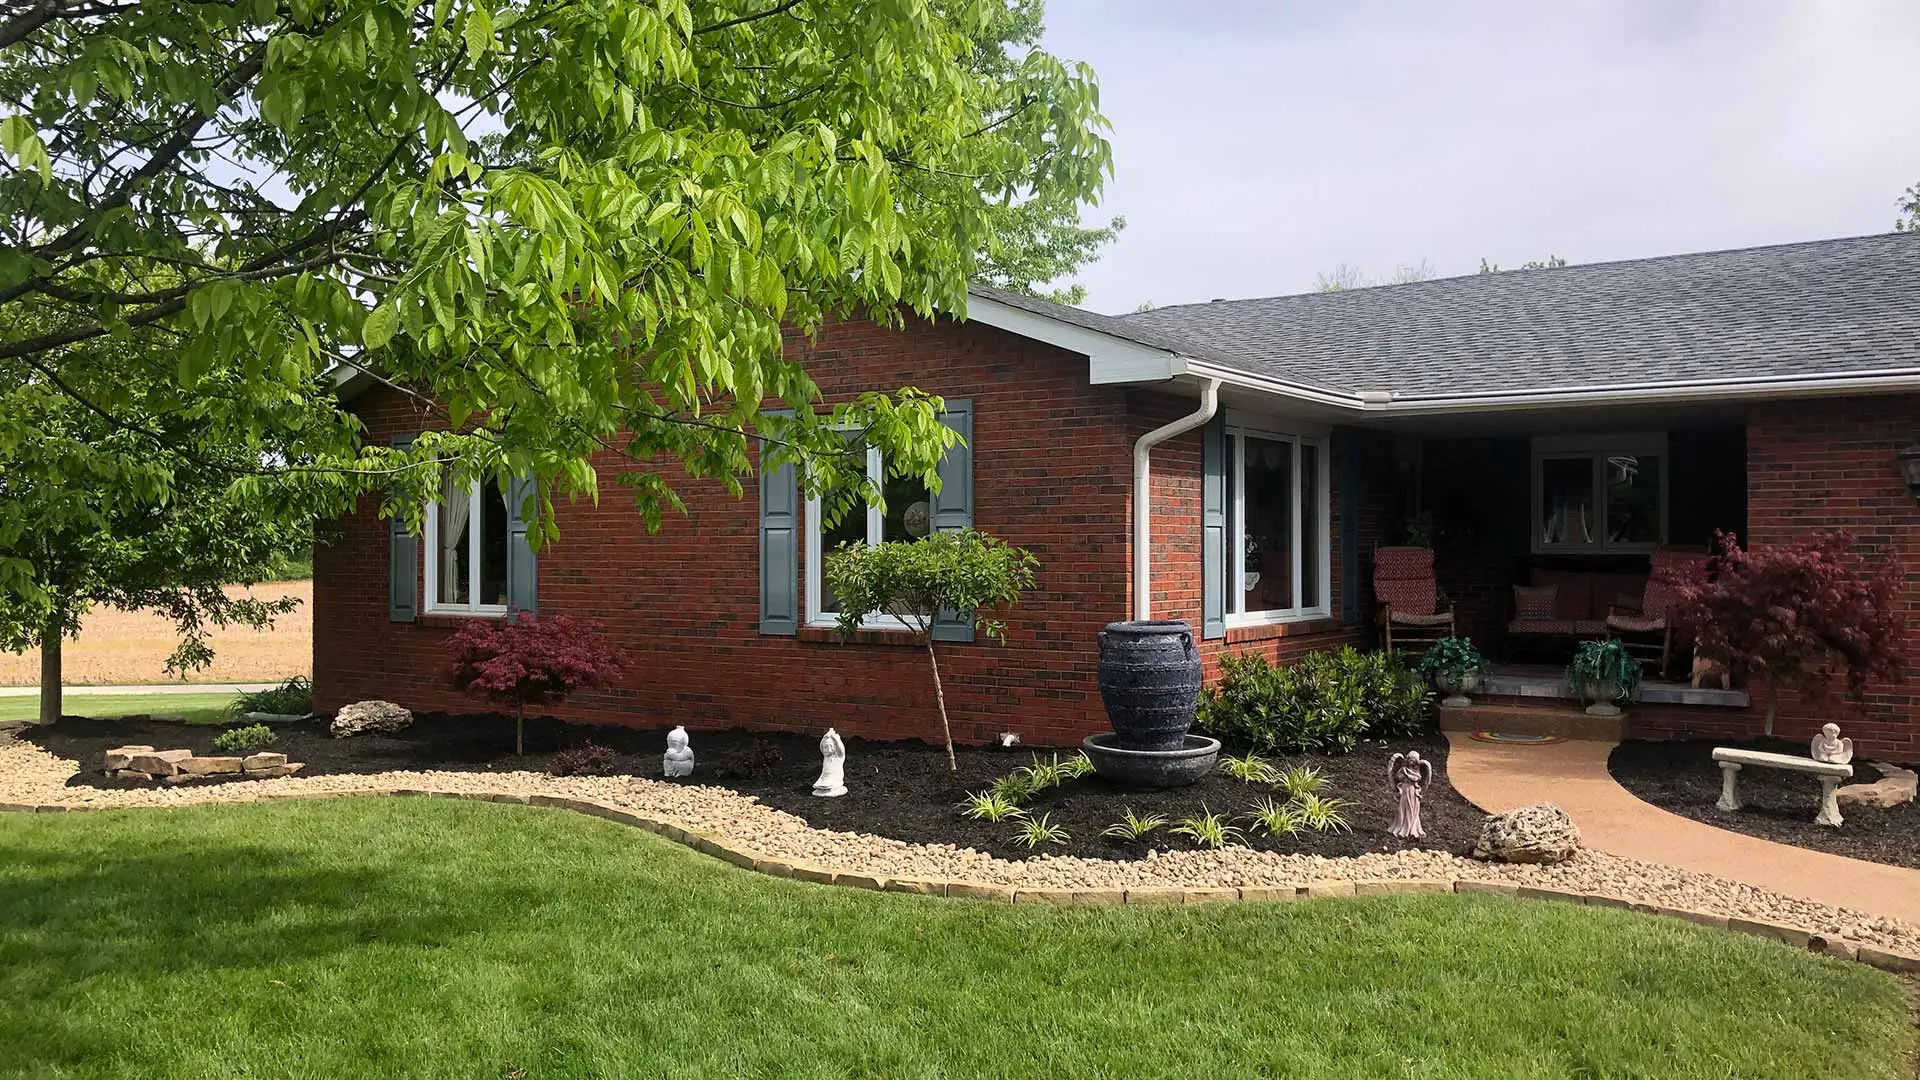 A home front in Godfrey, IL with well maintained lawn and landscape. 